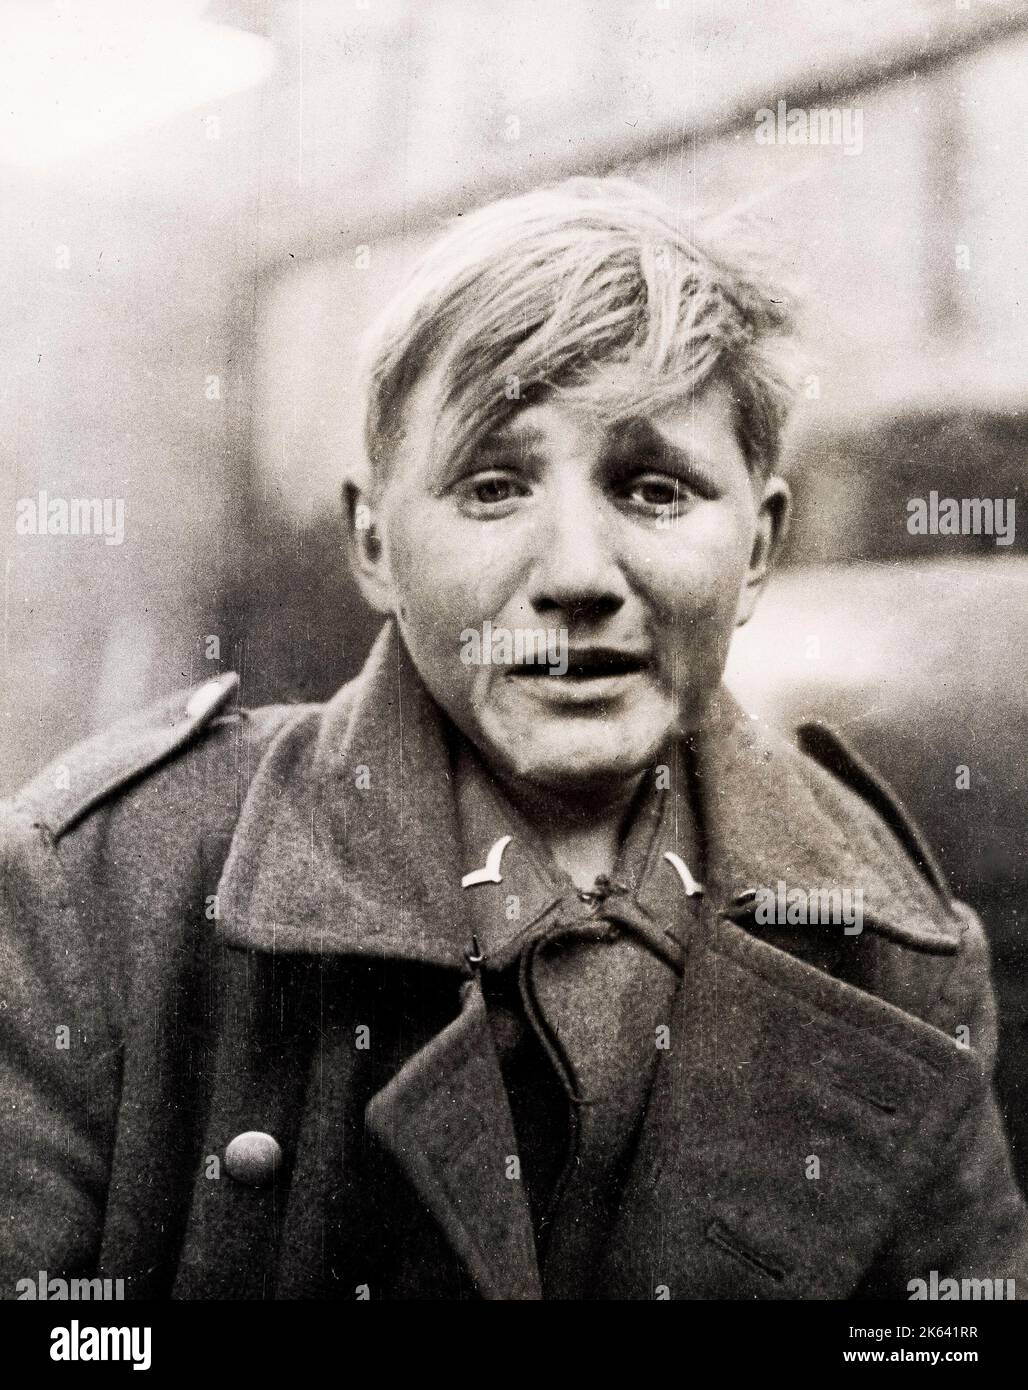 World War II - a young captured German soldier in distress  - reputed to be only 15 years old Stock Photo